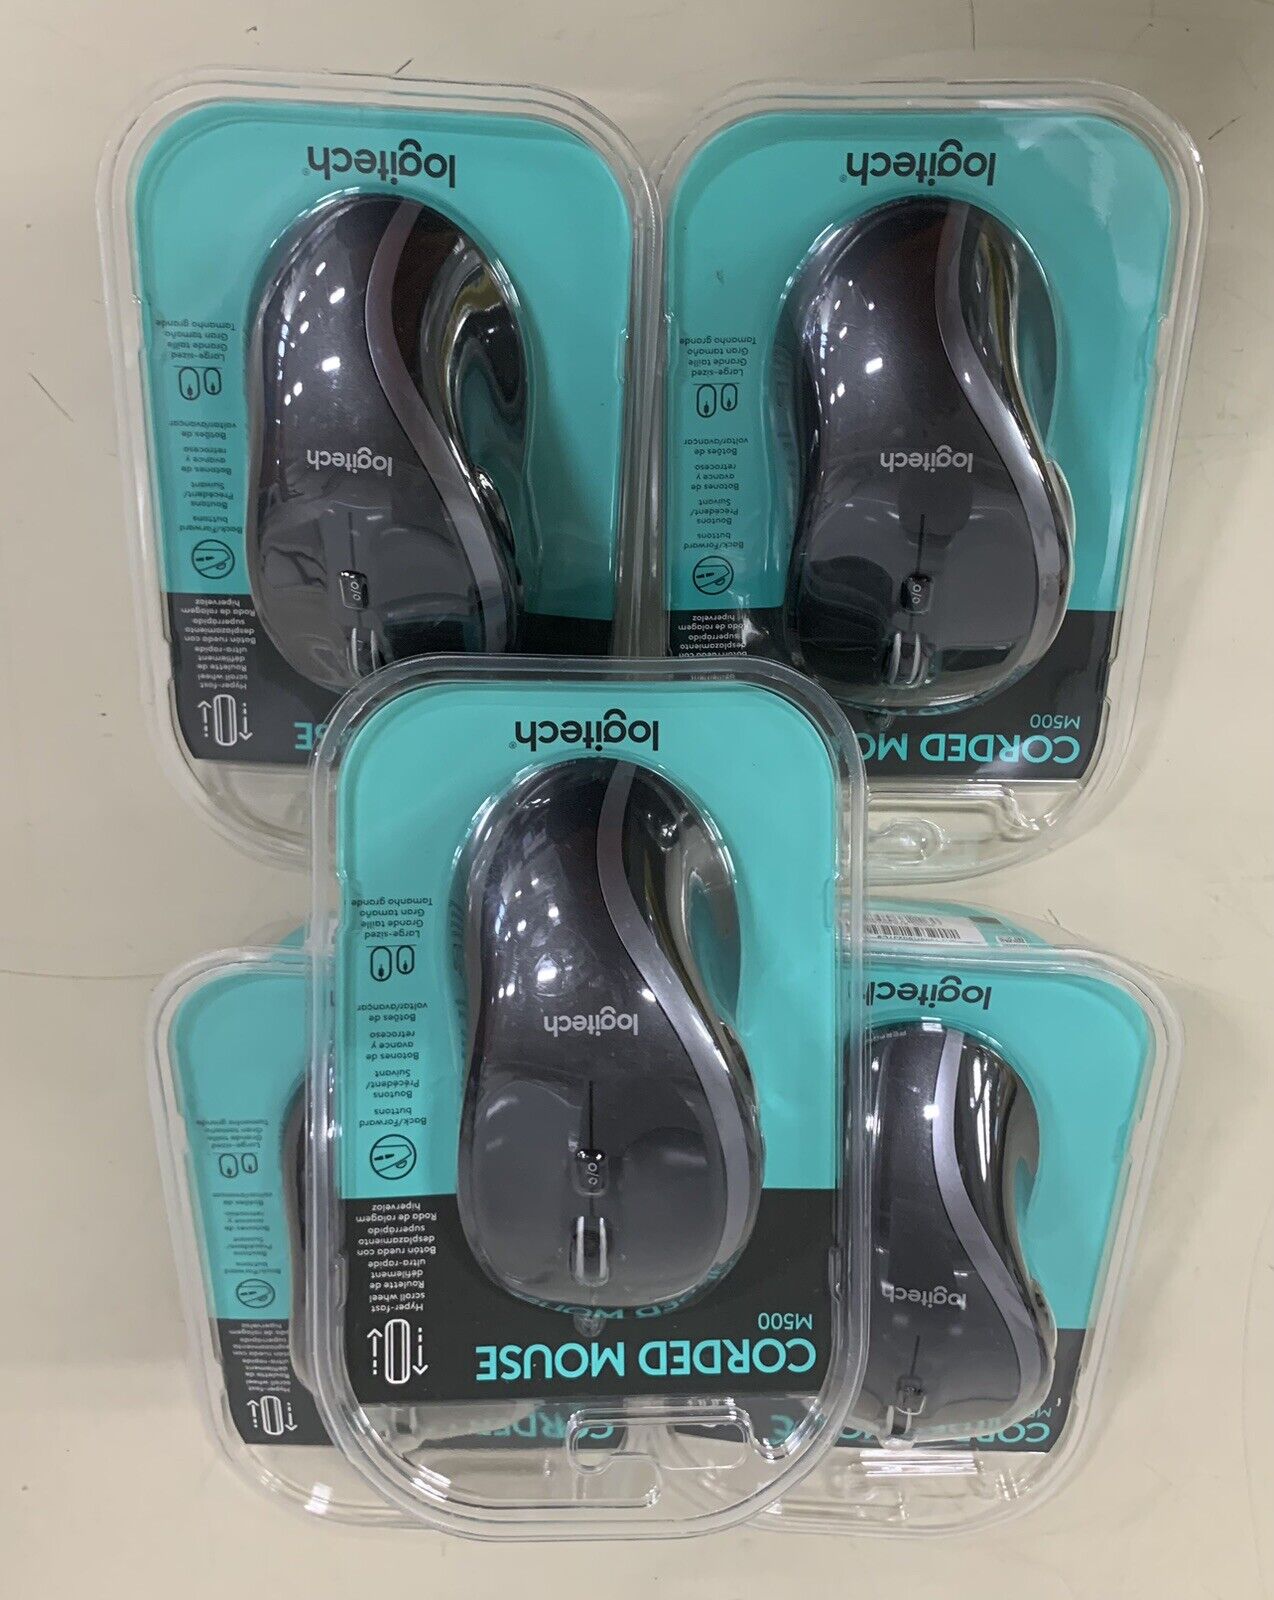 NEW SEALED Lot of 5) Logitech M500s Corded 7-Button USB Laser Scroll Mouse